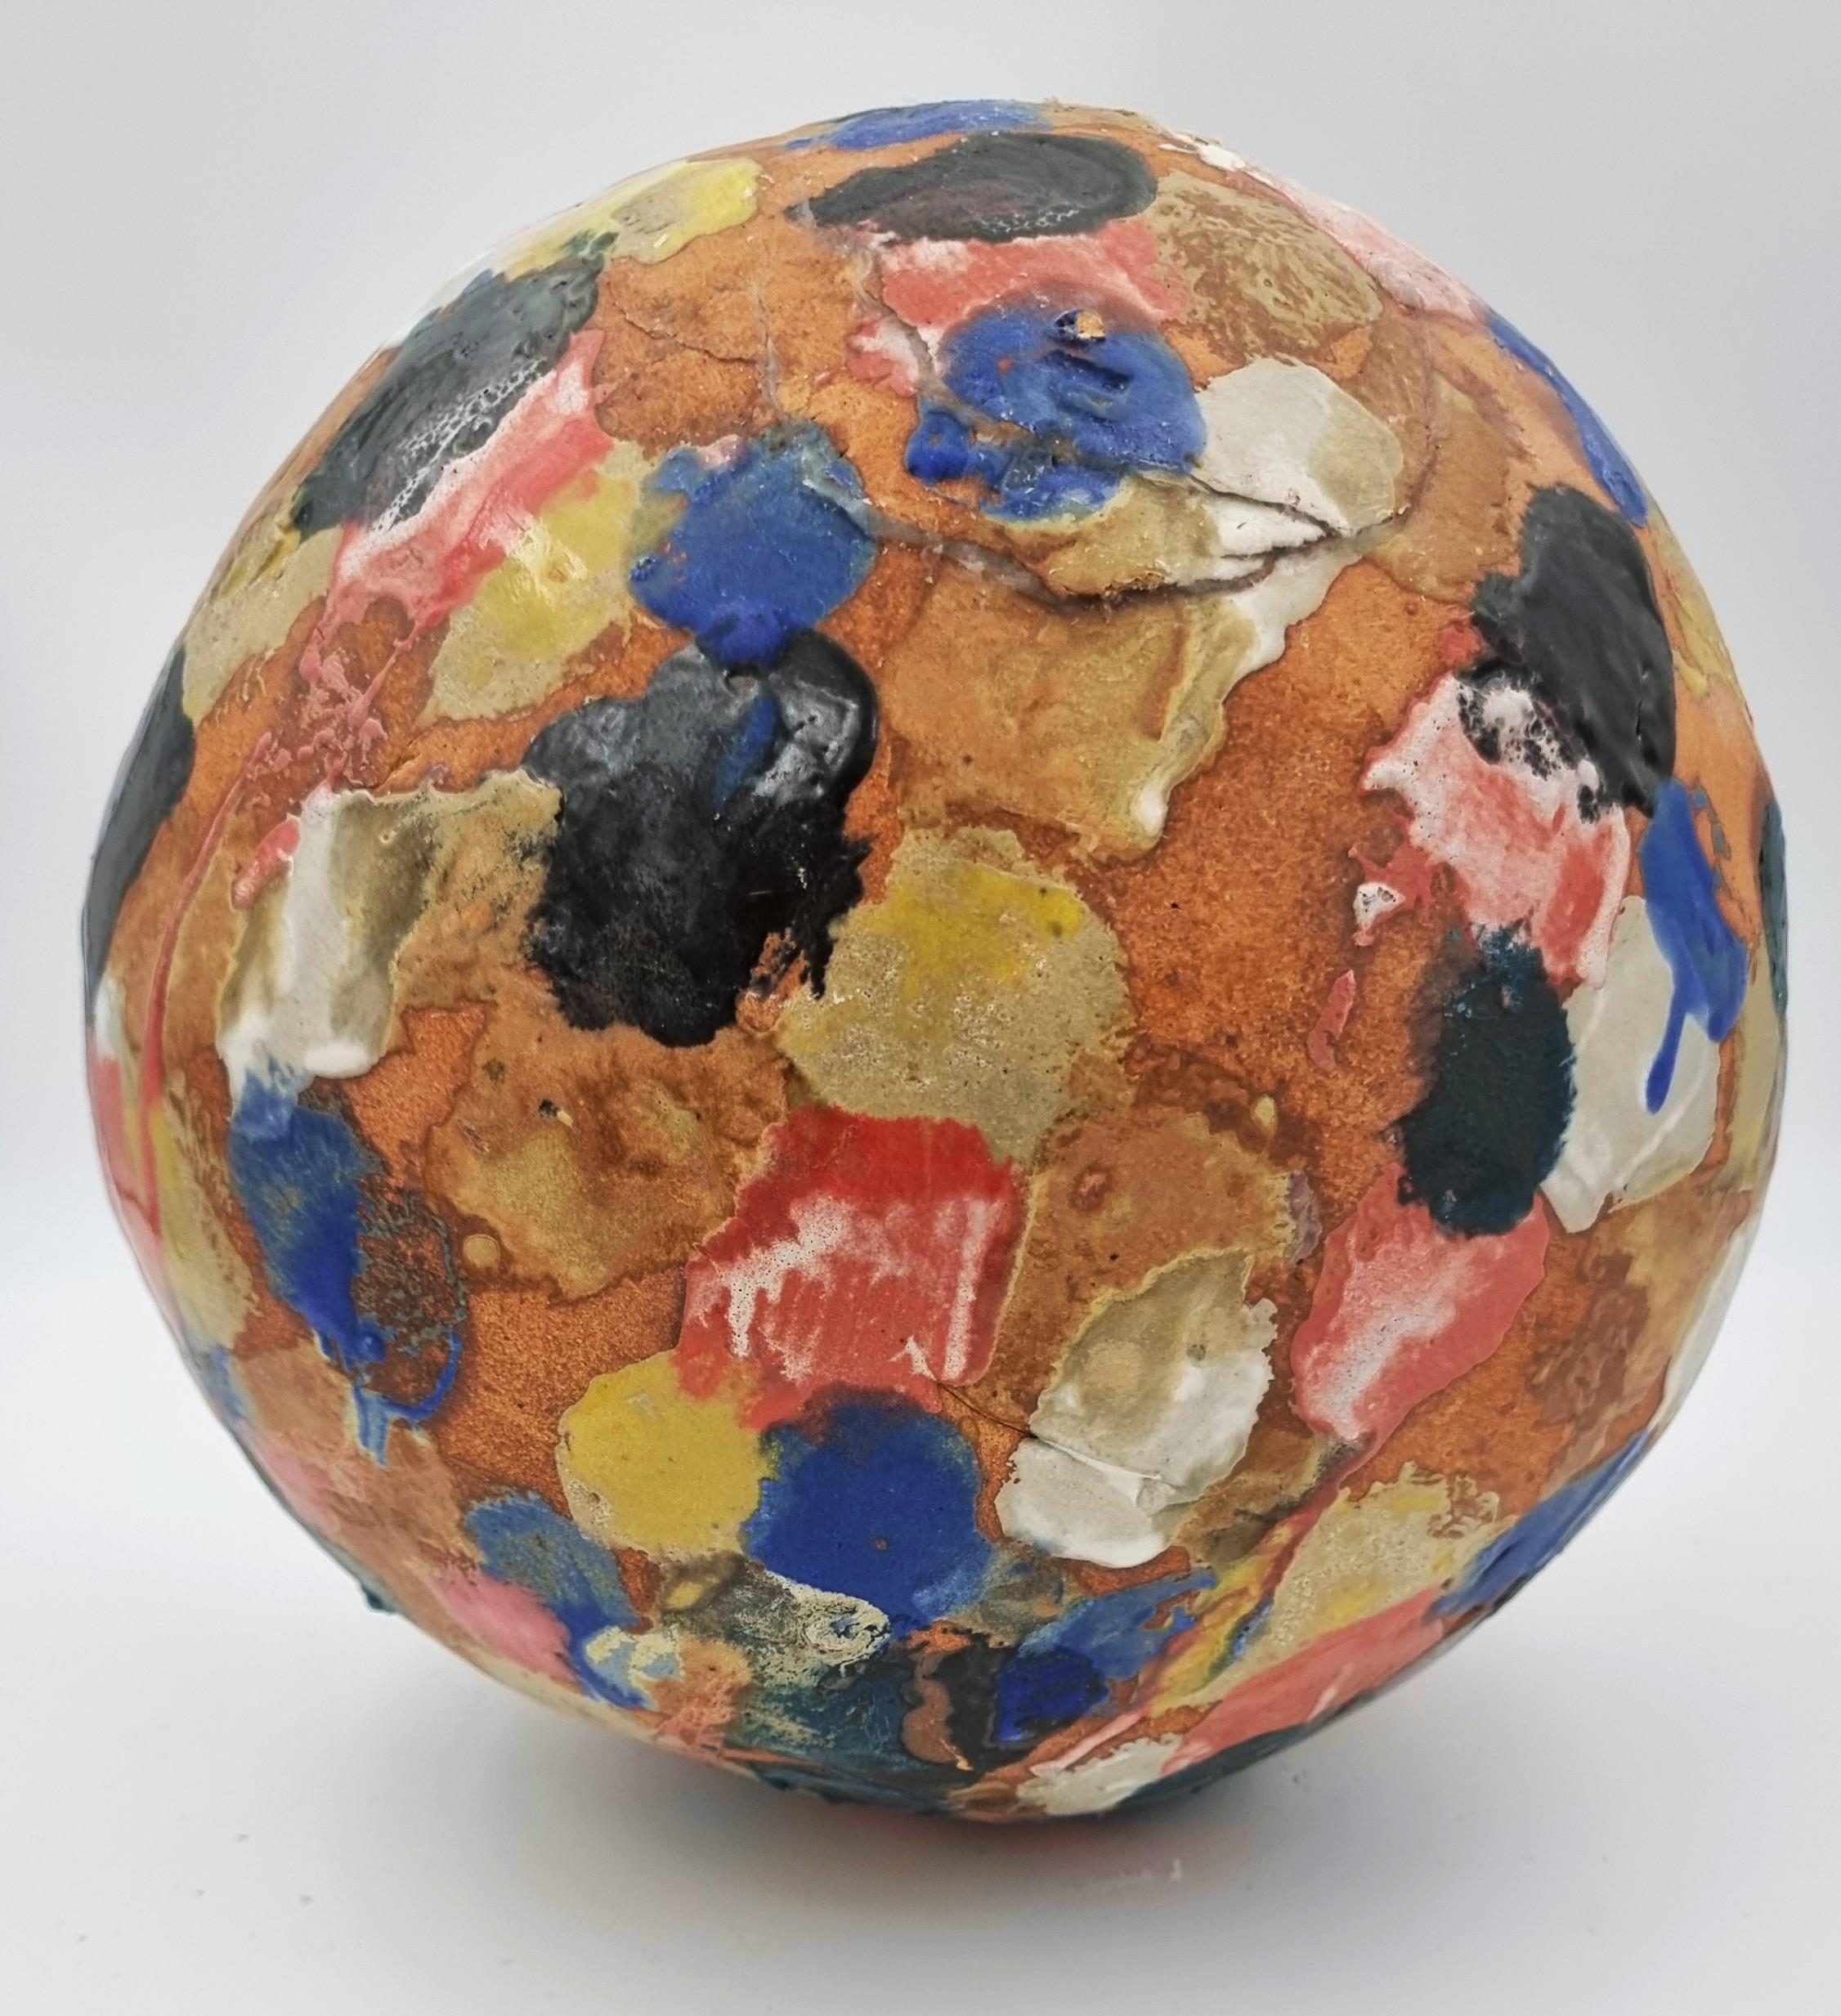 Untitled Sphere (multi-color) - Sculpture by Carol Fleming